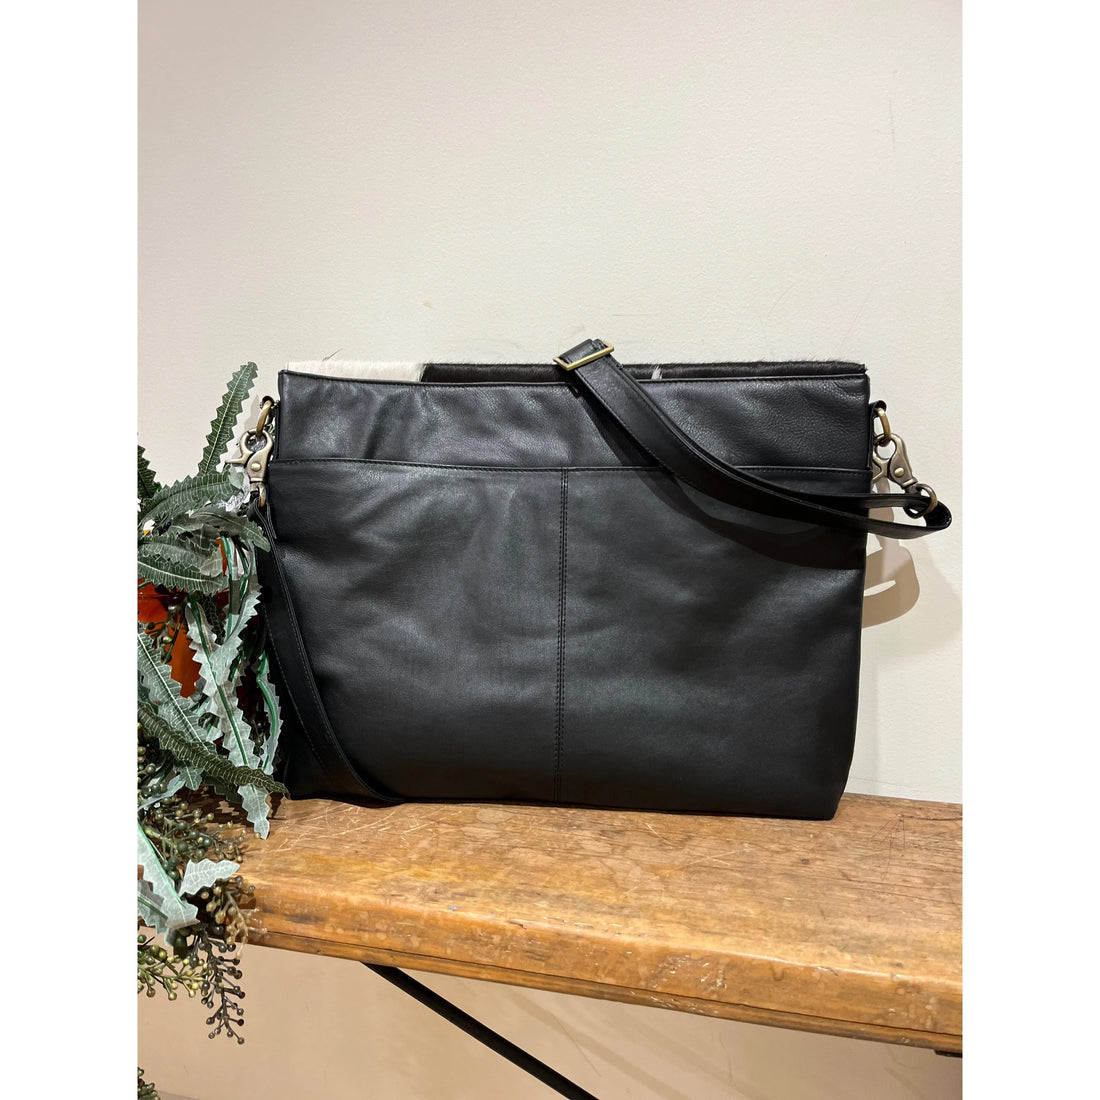 Dalby laptop satchel - hide and leather 